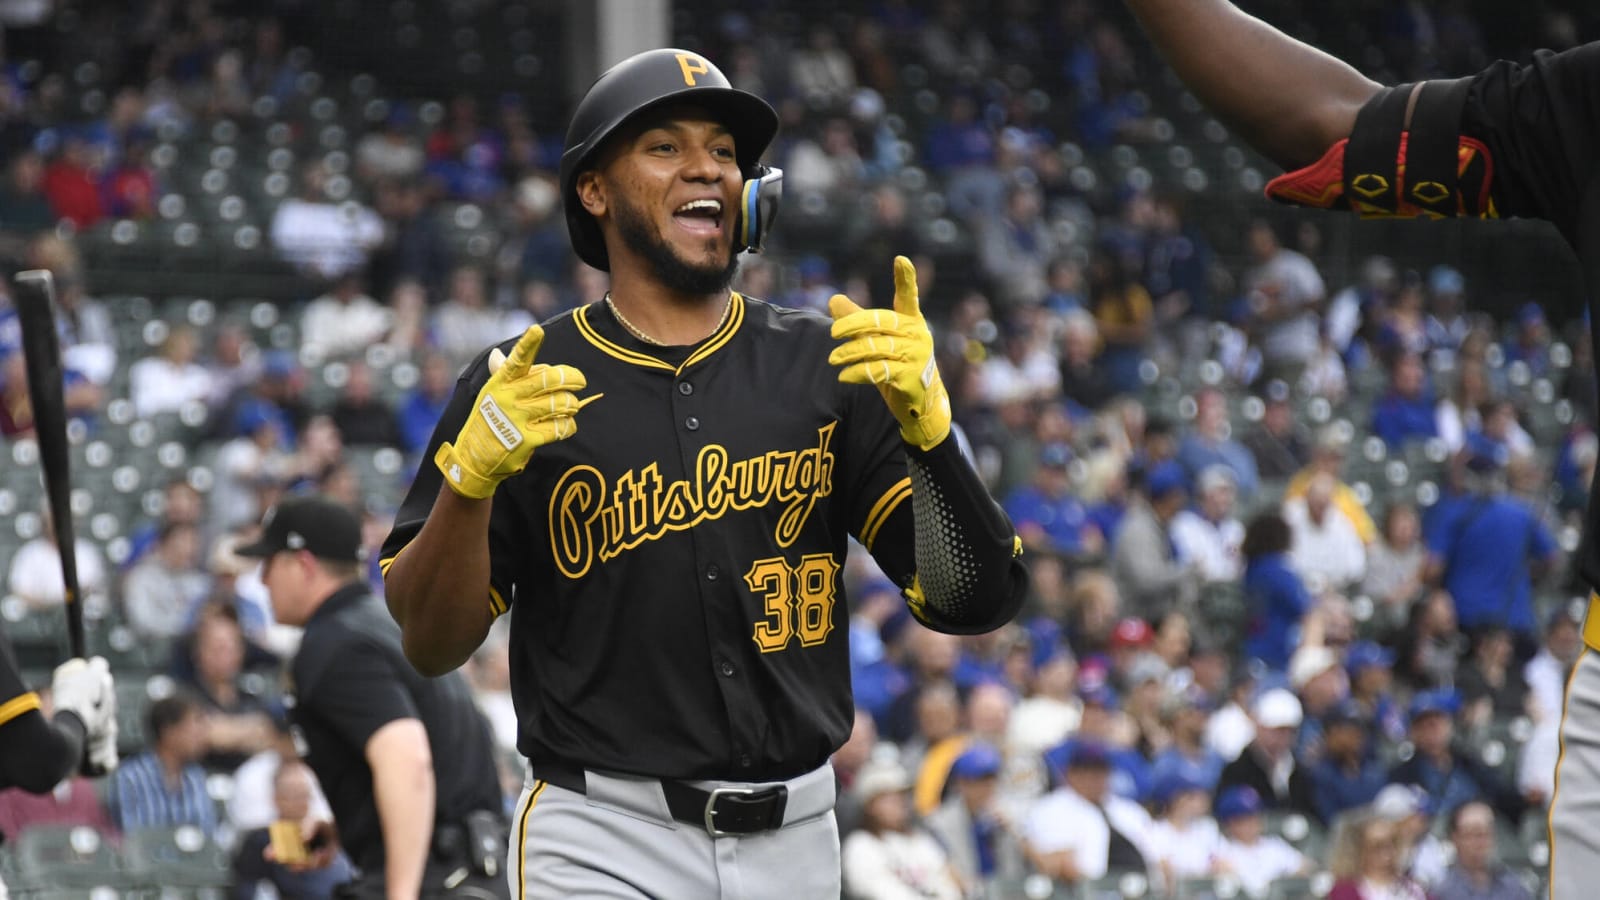 Olivares, Gonzales Power Pirates to 5-4 Win Over Cubs